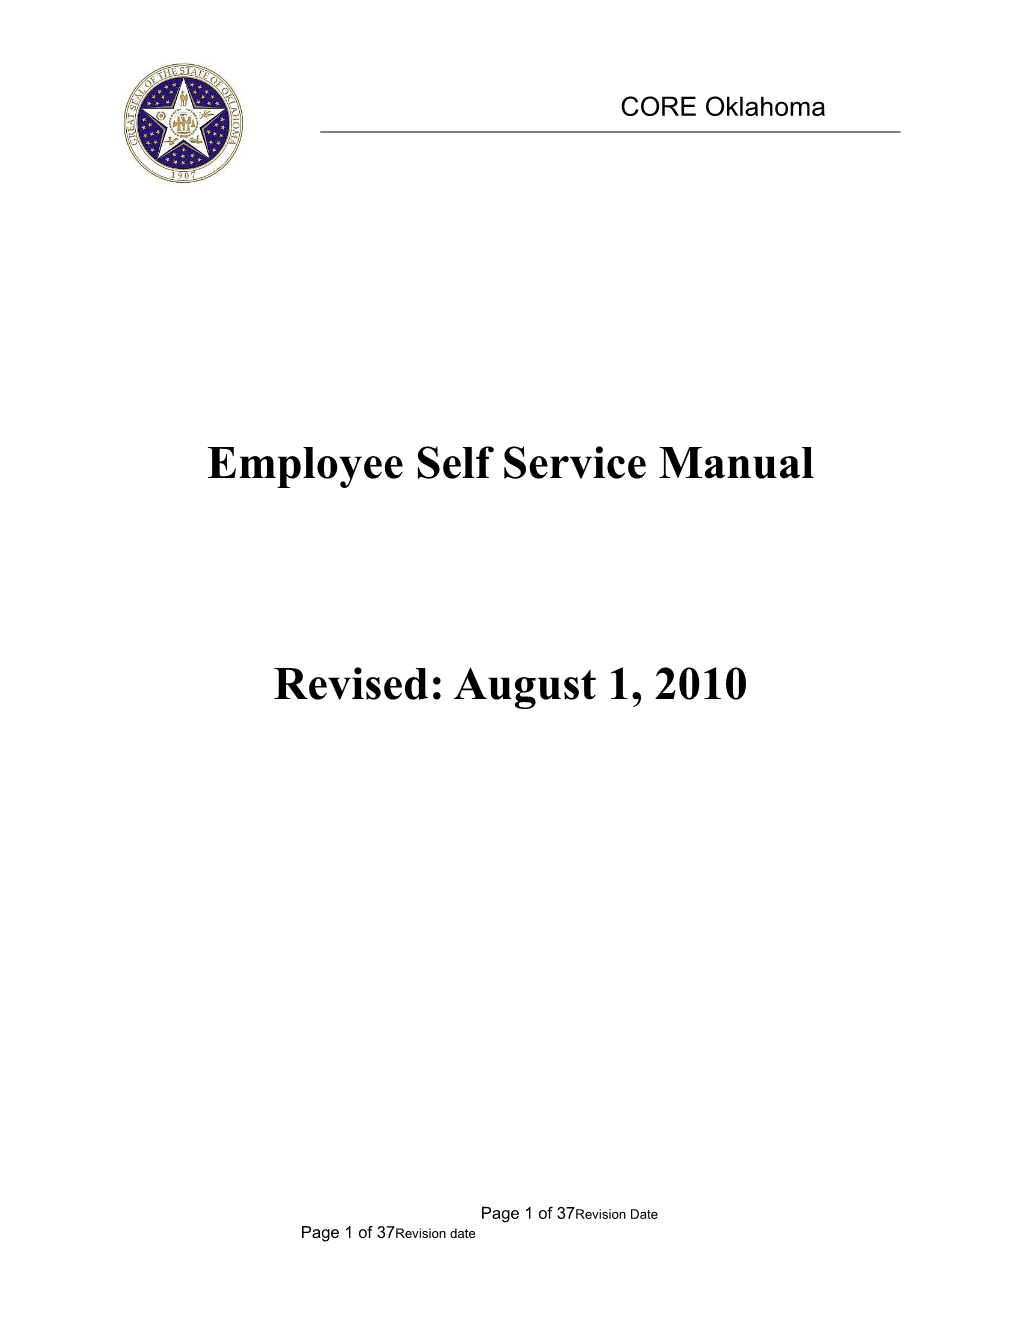 Employee Self-Service Manual for the State of Oklahoma